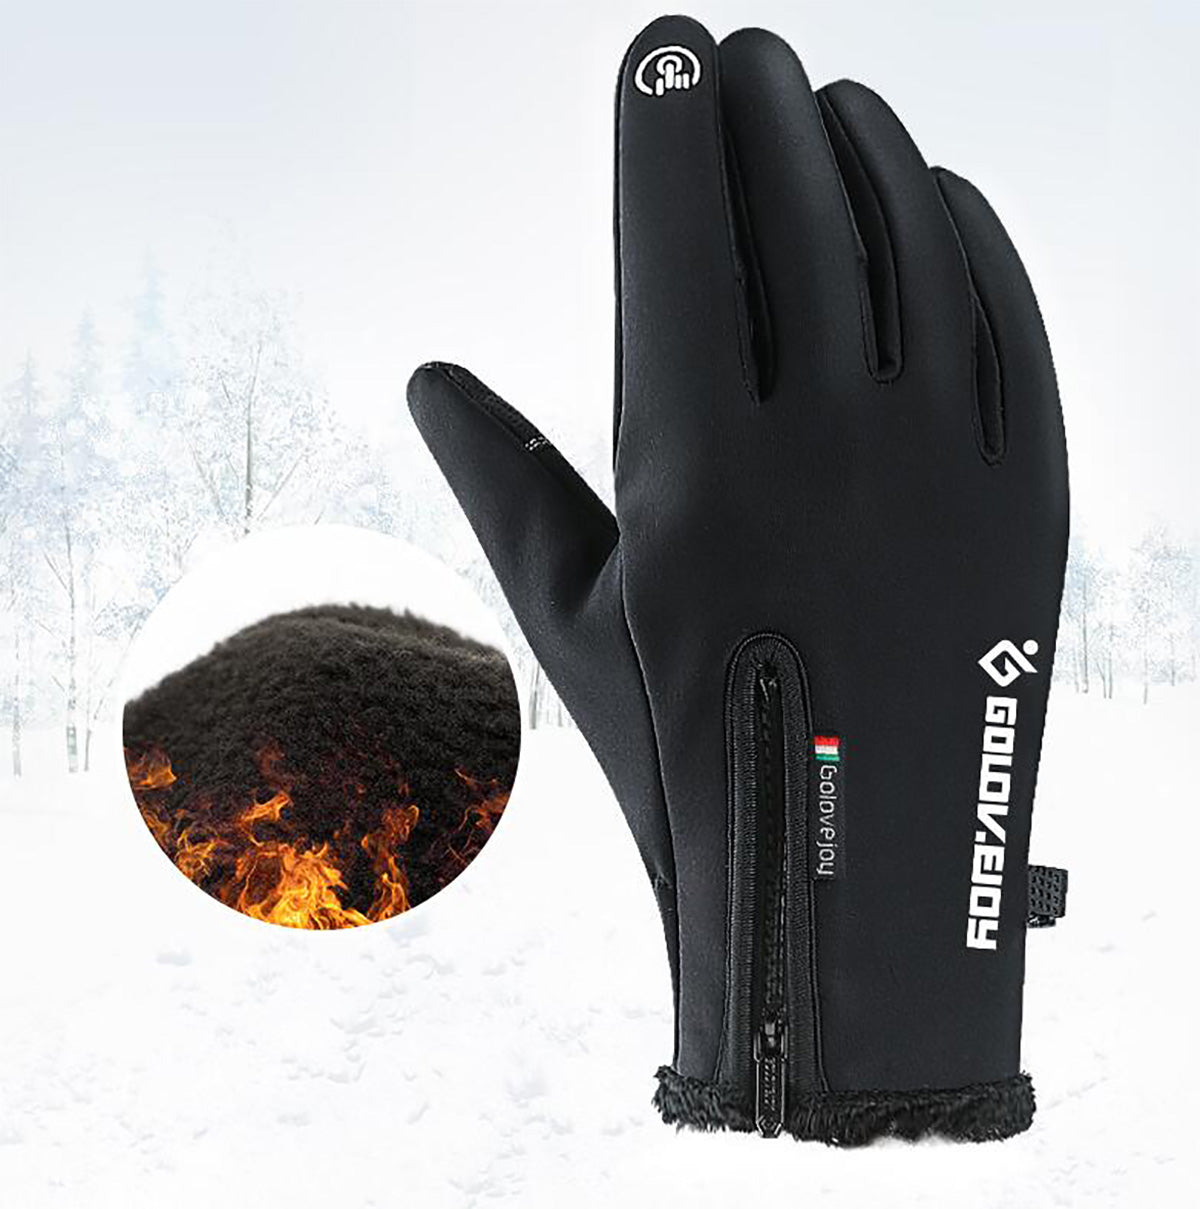 Black Adults Touch Screen Gloves Zipper Thermal Winter Sports Warm Motorcycle Full Finger Mittens